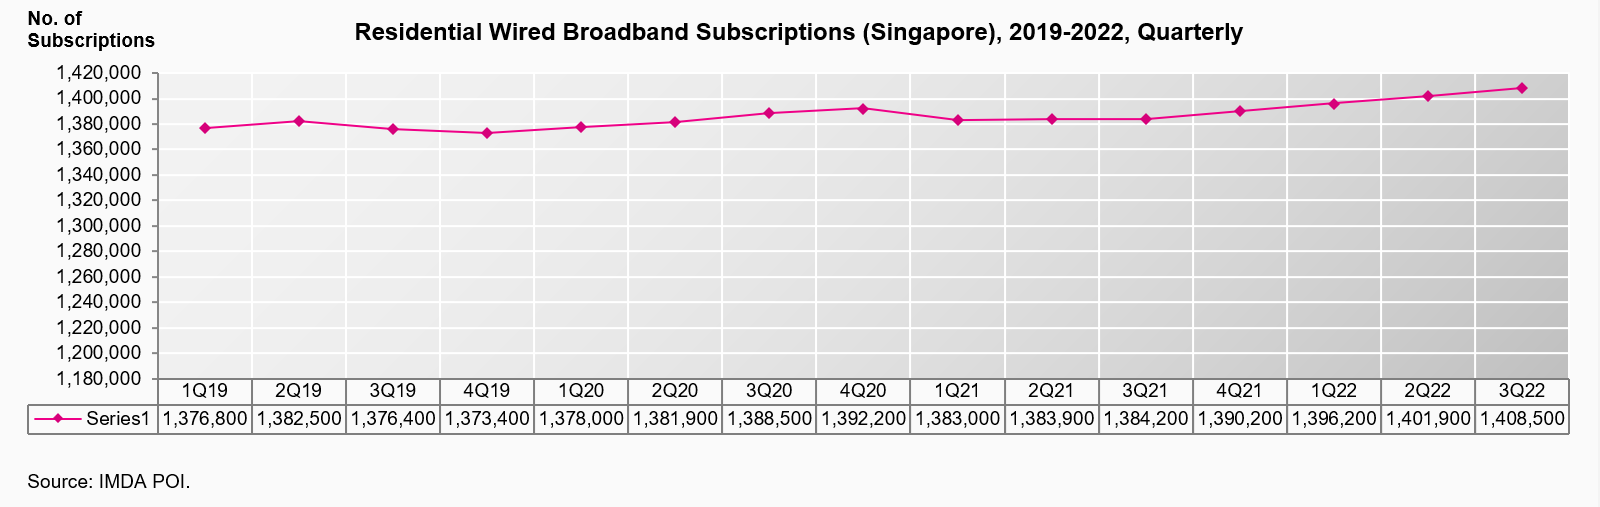 Residential Wired Broadband Subscriptions (Singapore), 2019-2022, Quarterly